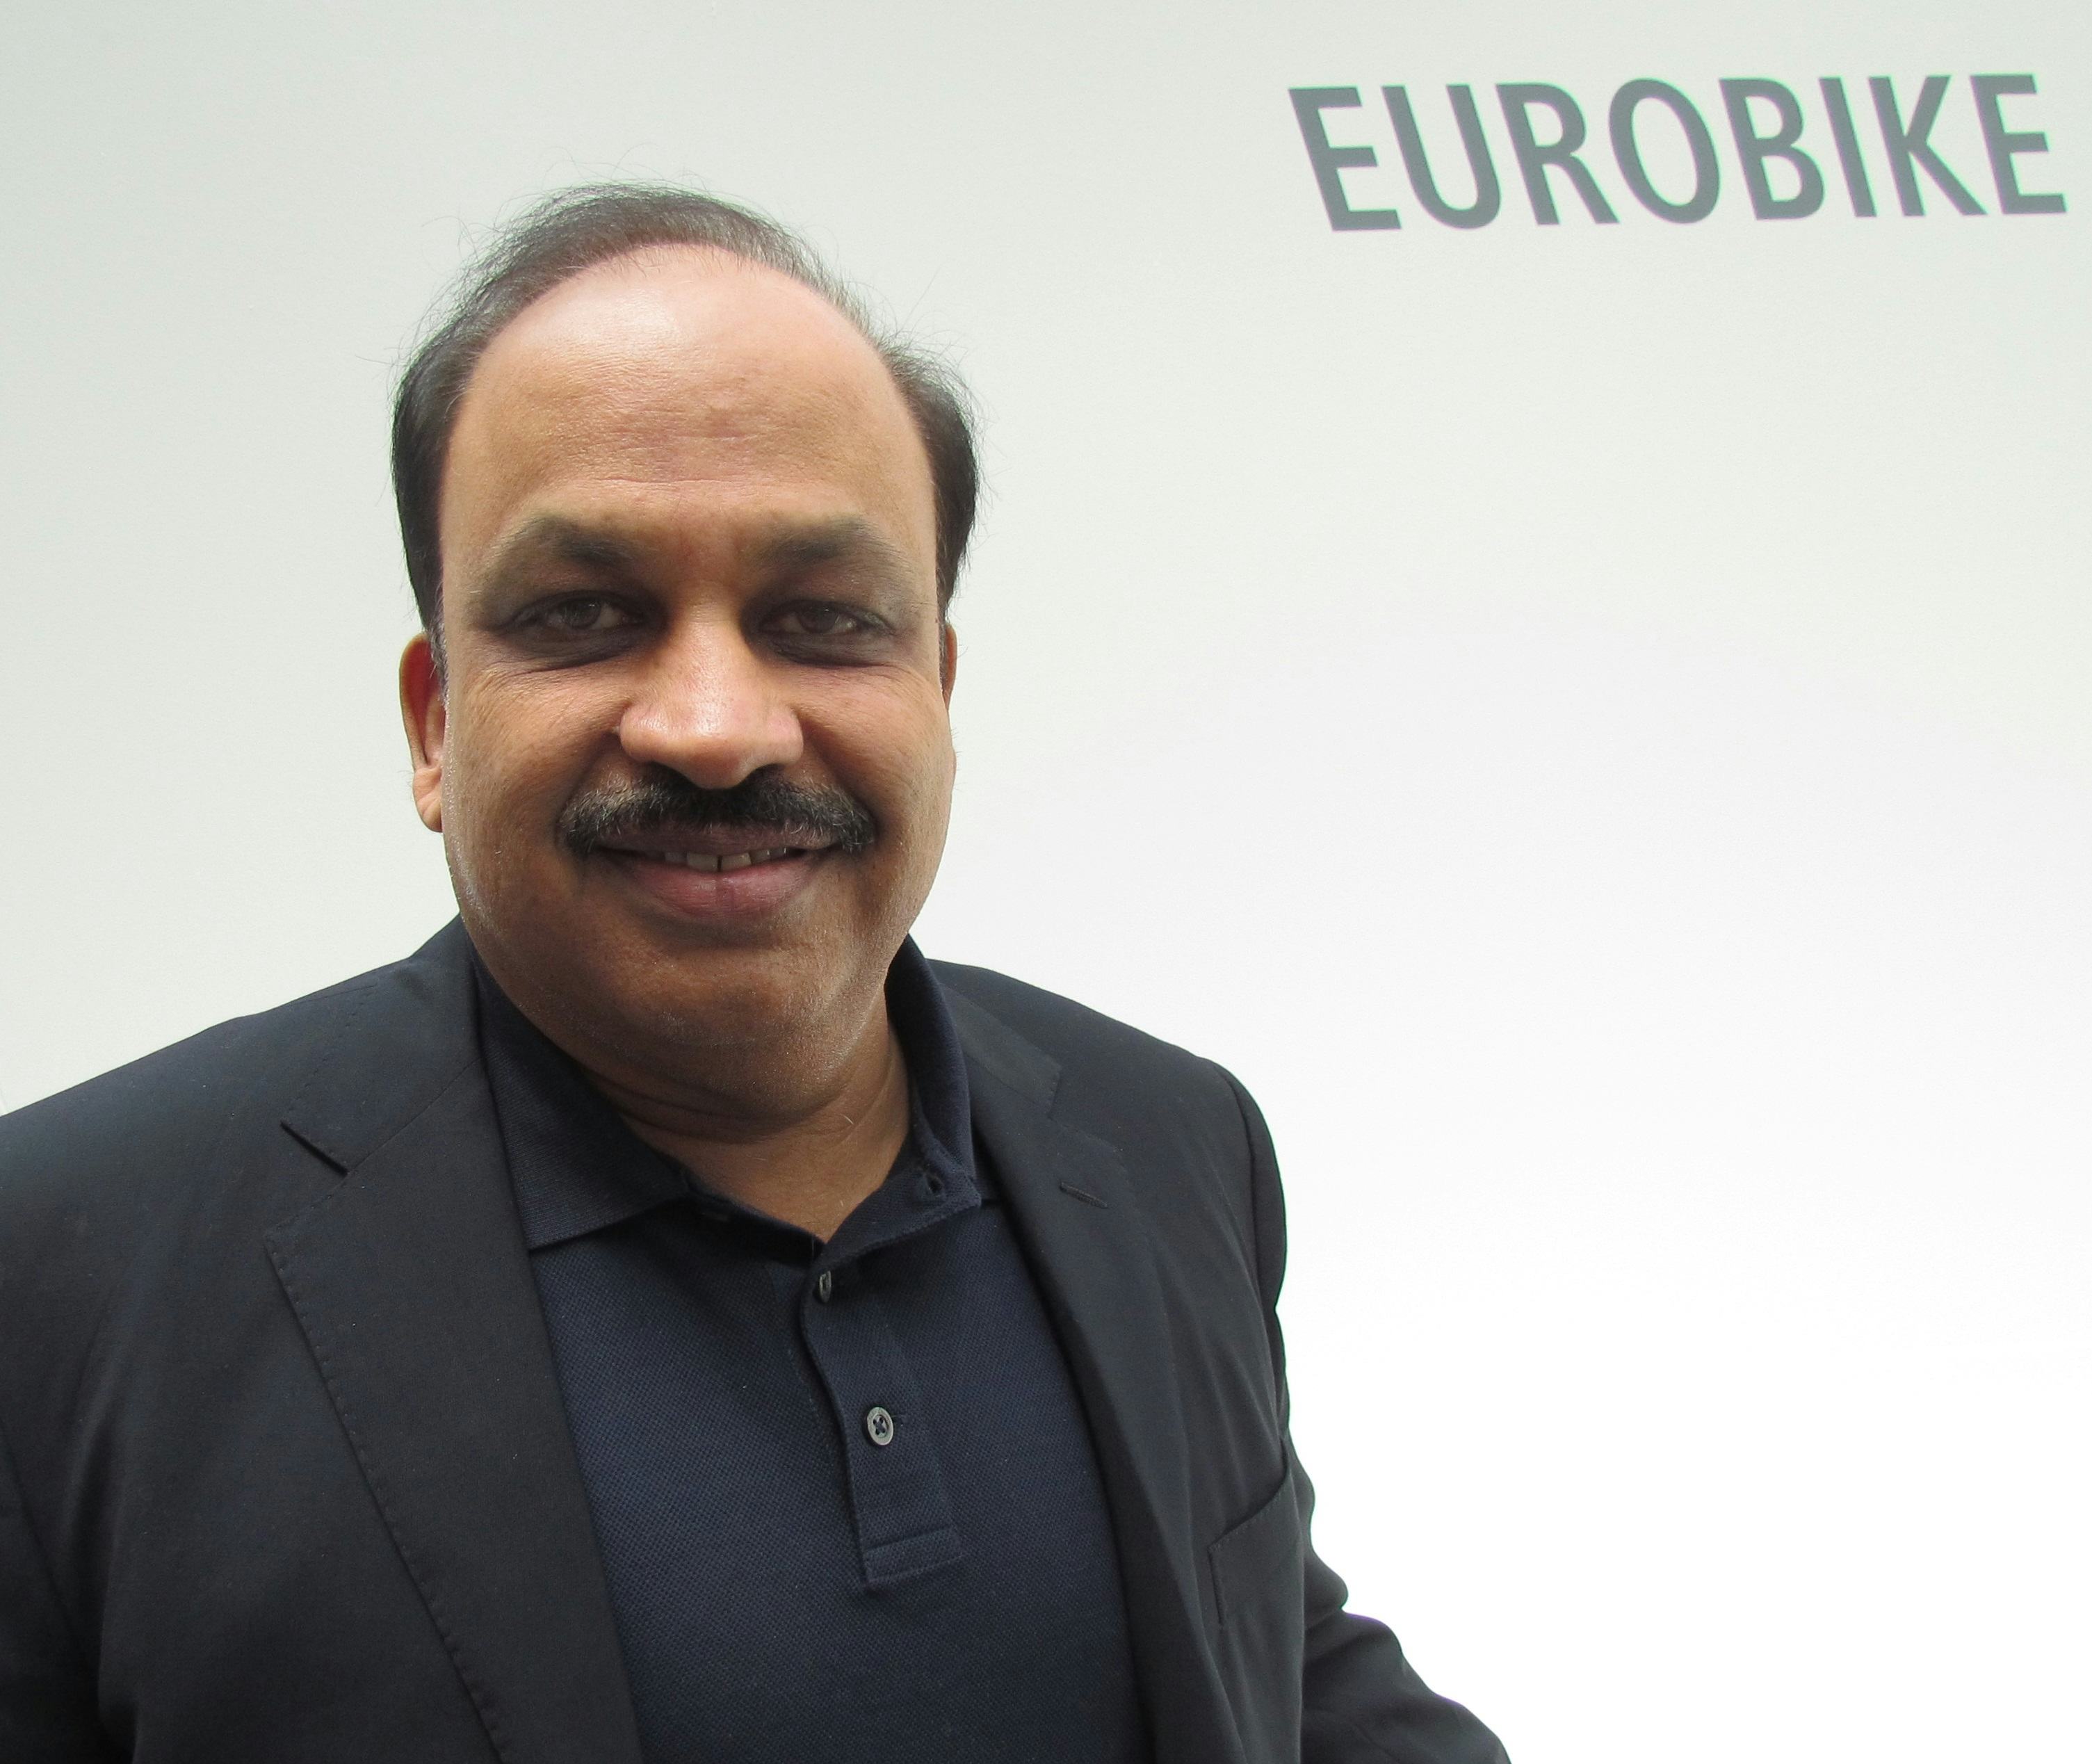 Hero Cycles MD Pankaj Munjal numerous times said to be looking for a production base in Europe. – Photo Bike Europe